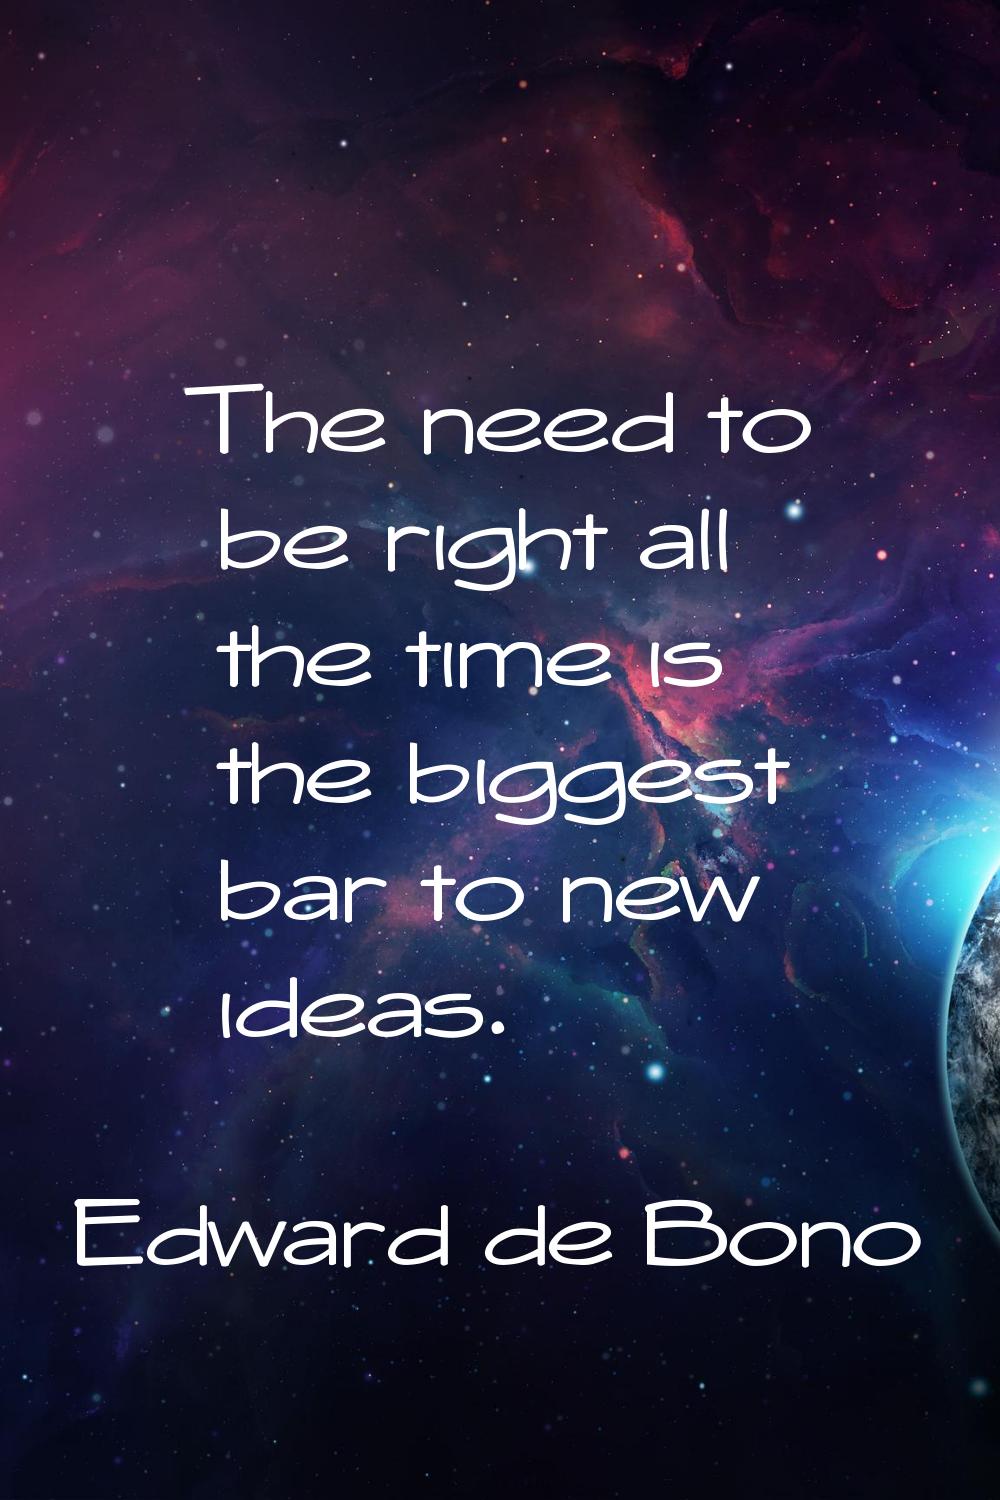 The need to be right all the time is the biggest bar to new ideas.